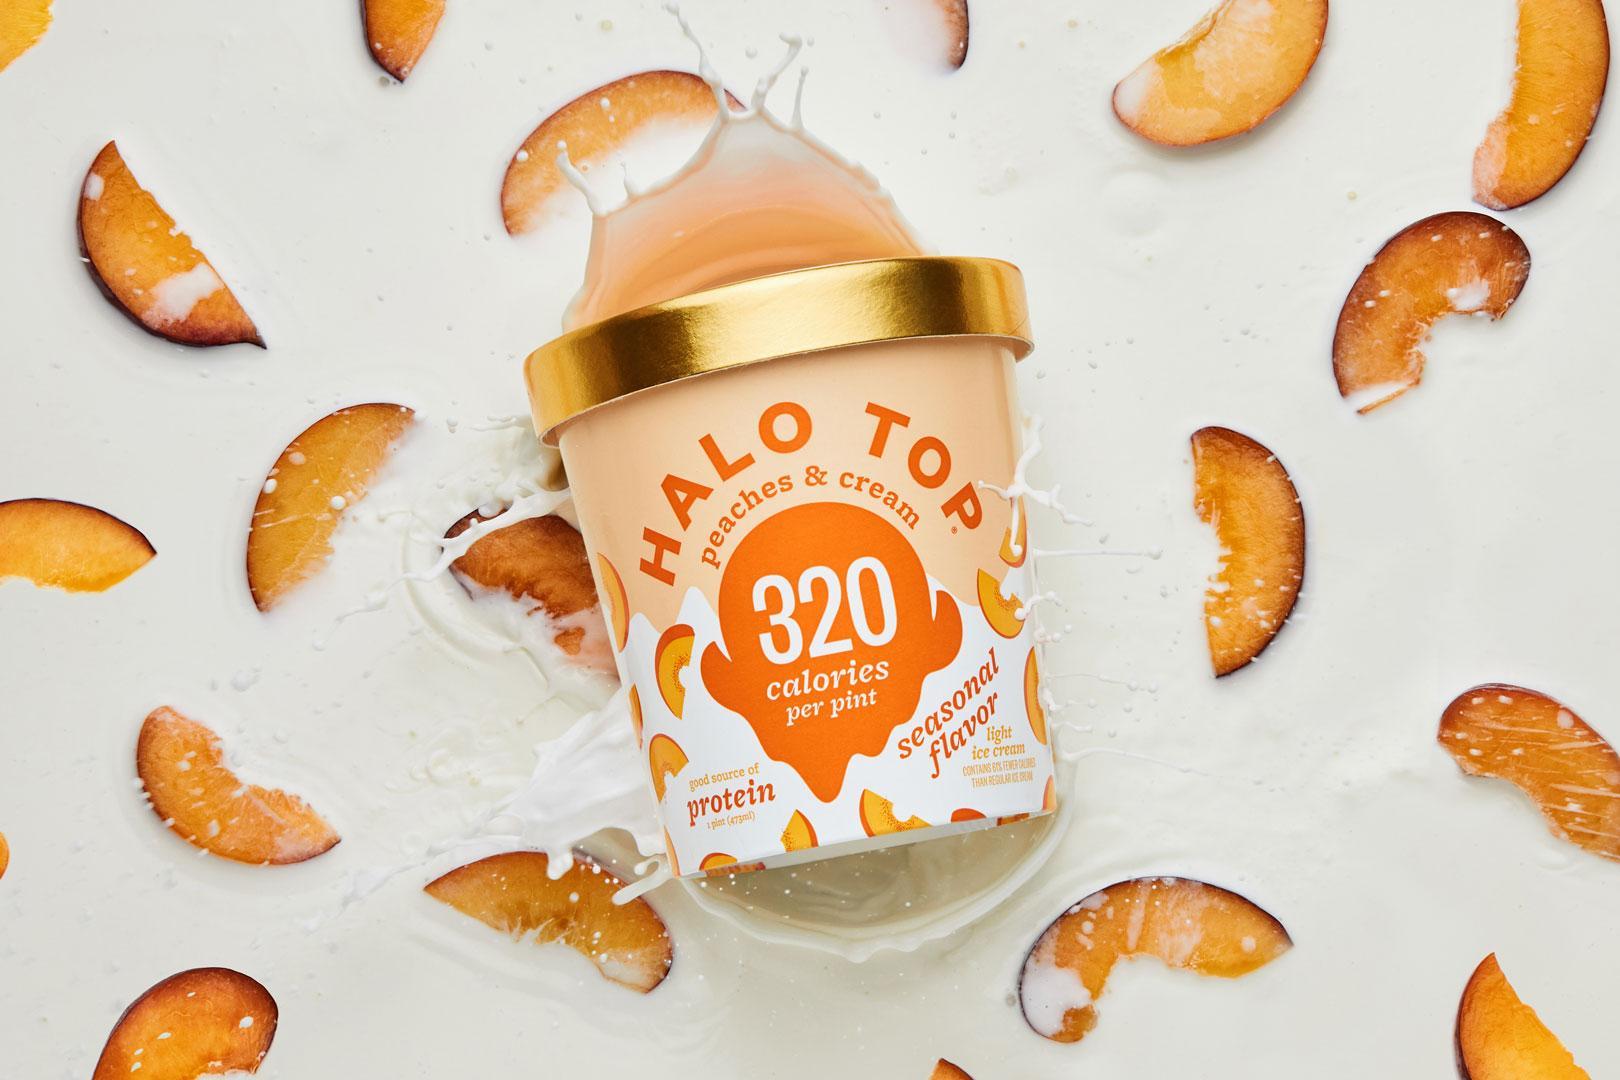 Halo Top facts